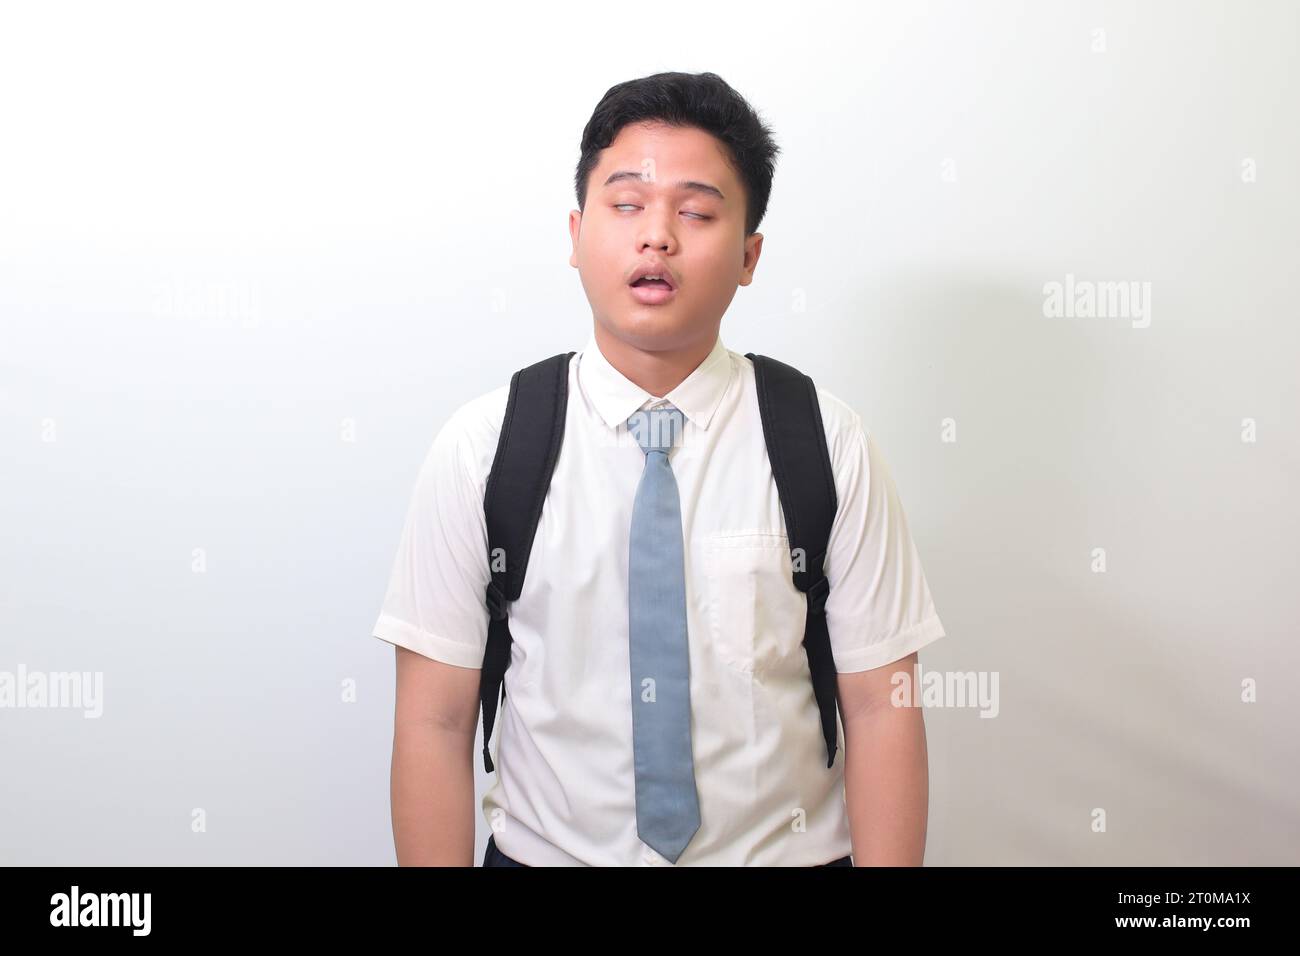 Indonesian senior high school student wearing white shirt uniform with gray tie yawning with closed eyes due to overworking. Isolated image on white b Stock Photo